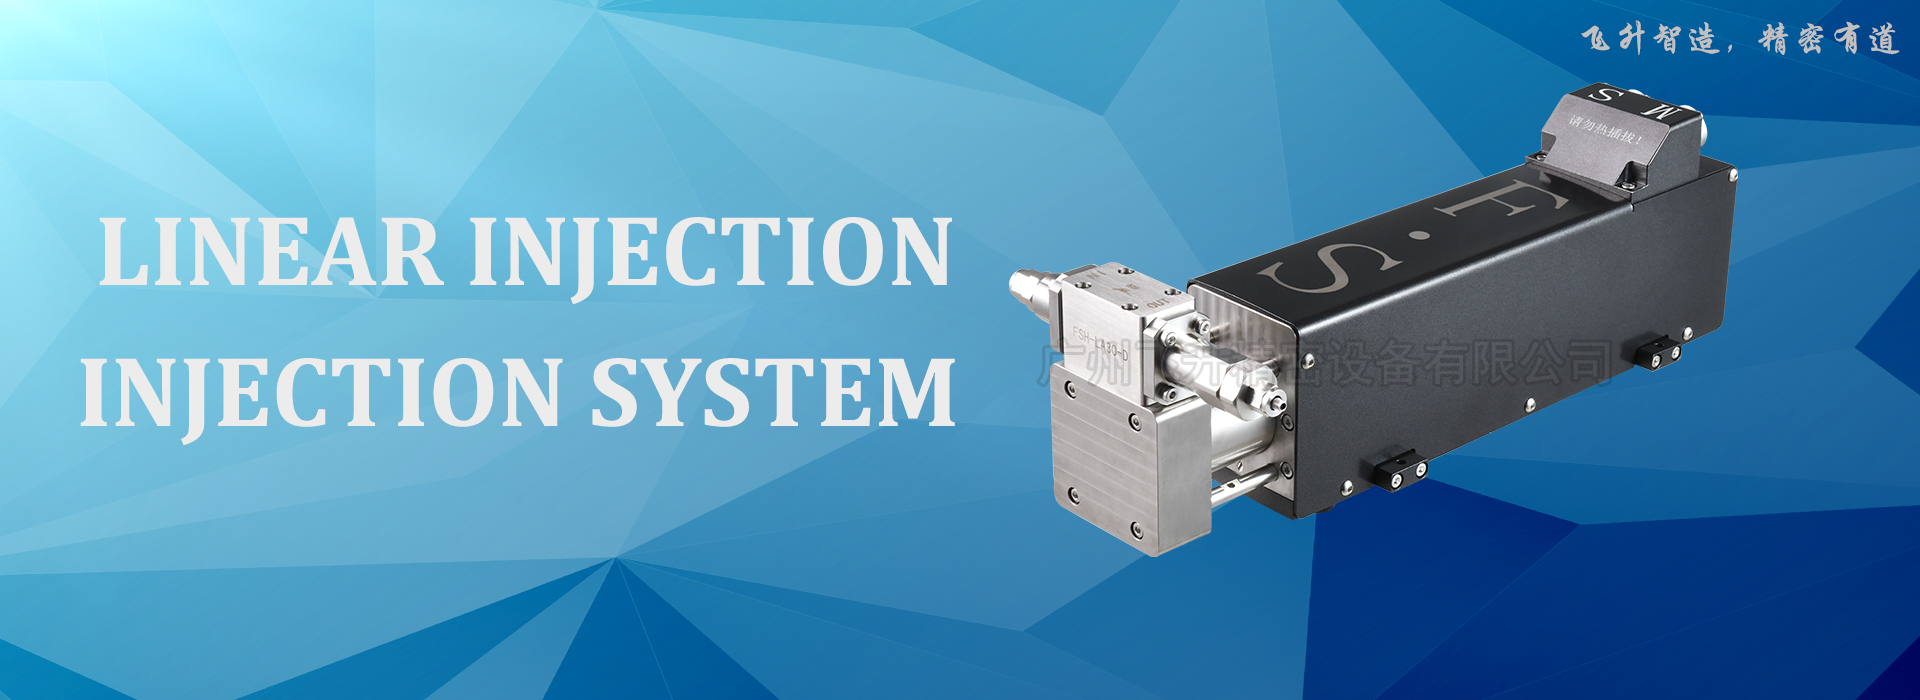 linear injection system